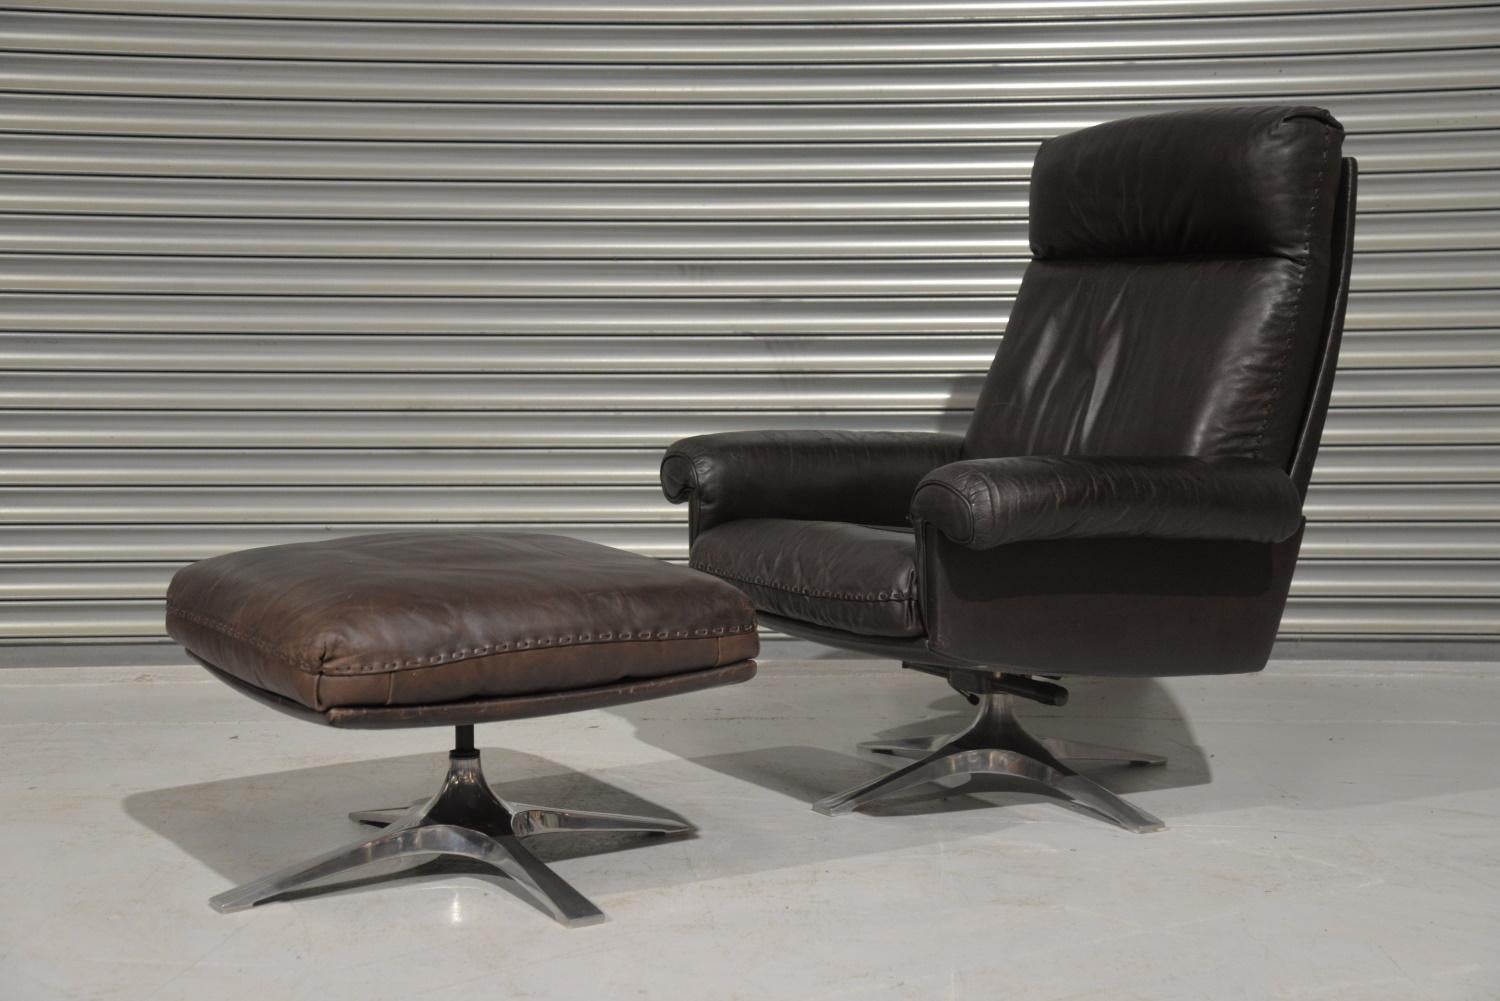 We are delighted to bring to you a highly desirable and rarely available vintage 1970s De Sede DS 31 high back swivel leather armchair with ottoman. Hand built in the 1970s by De Sede craftsman in Switzerland. The swivel leather armchair stands on a